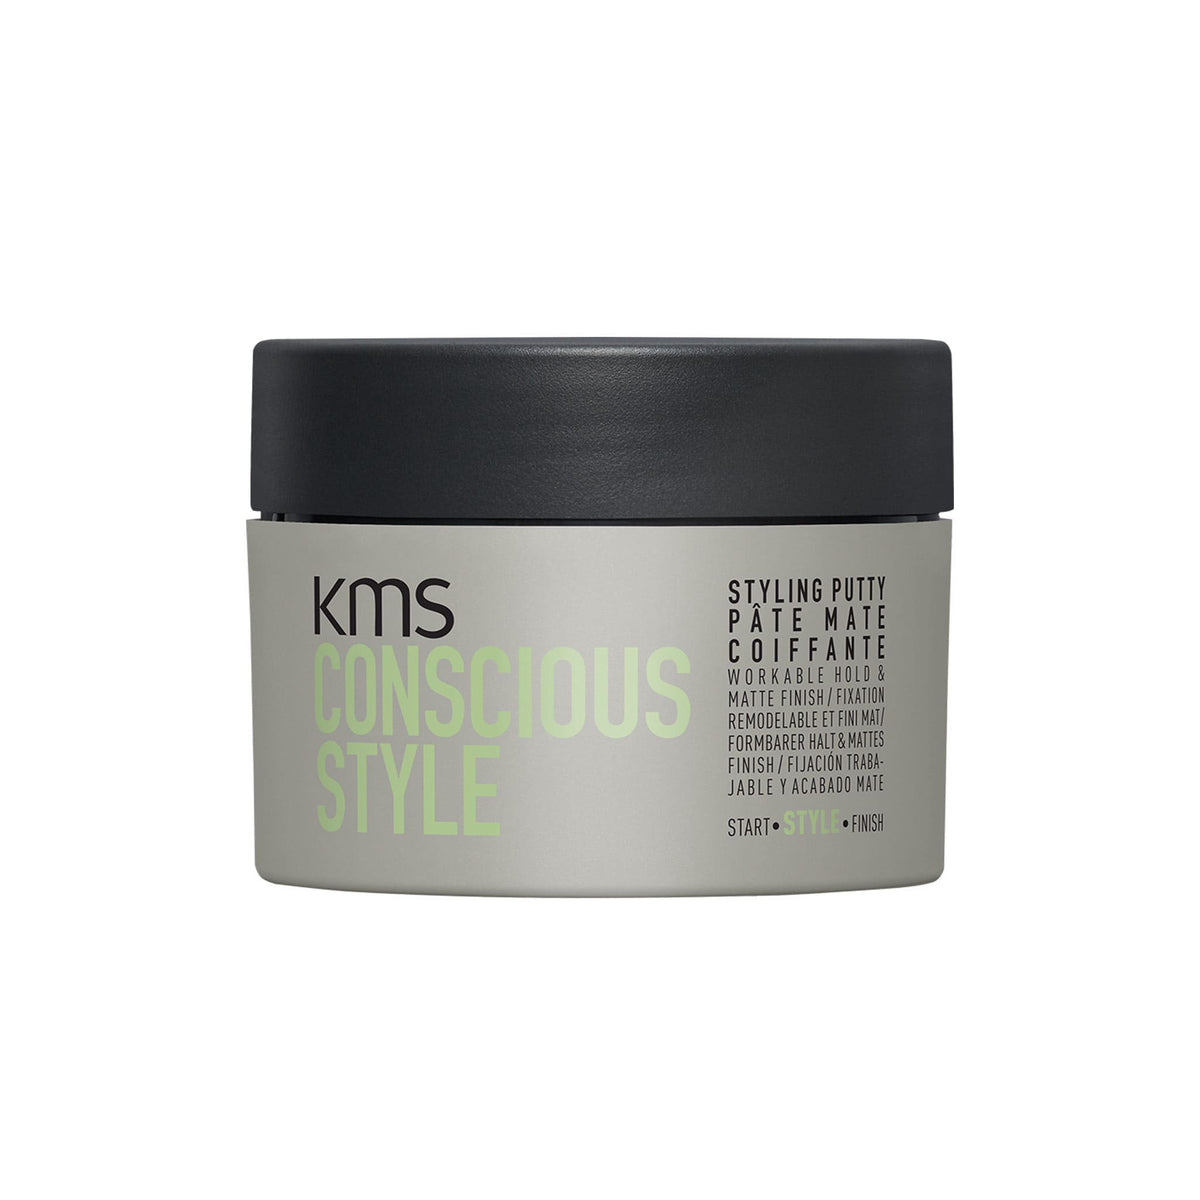 Kms California Conscious Style Styling Putty | Retail Box